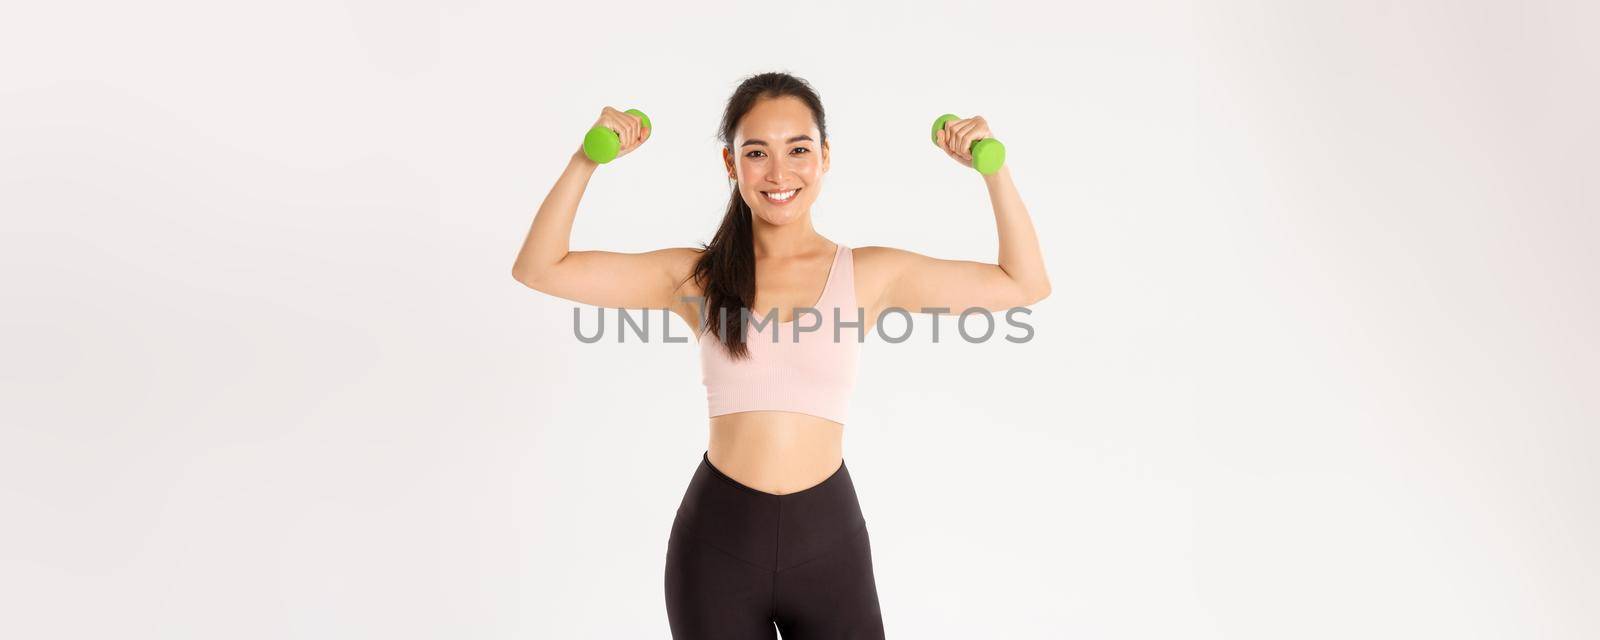 Fitness, healthy lifestyle and wellbeing concept. Portrait of strong and happy female athlete, asian girl workout at home during coronavirus, lifting dumbbells to gain muscles, white background.